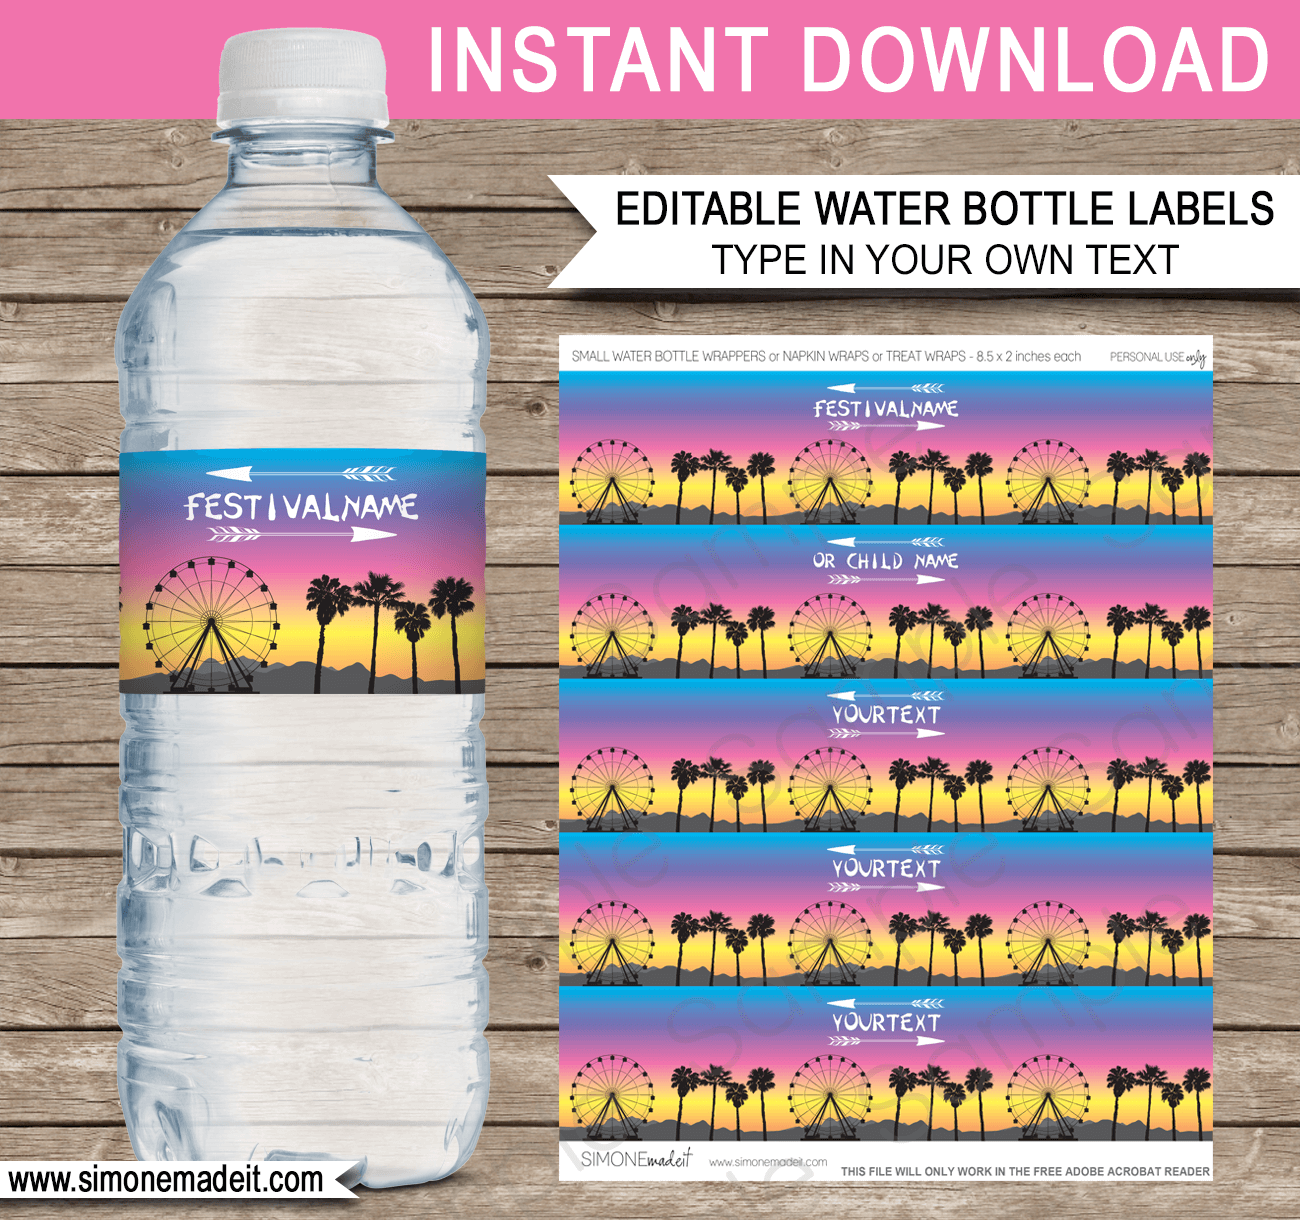 Printable Festival Party Water Bottle Labels | Festival Inspired Birthday Party Decorations | Editable DIY Template | Fete, Gala, Fair, Carnival, Music Festival | INSTANT DOWNLOAD via SIMONEmadeit.com